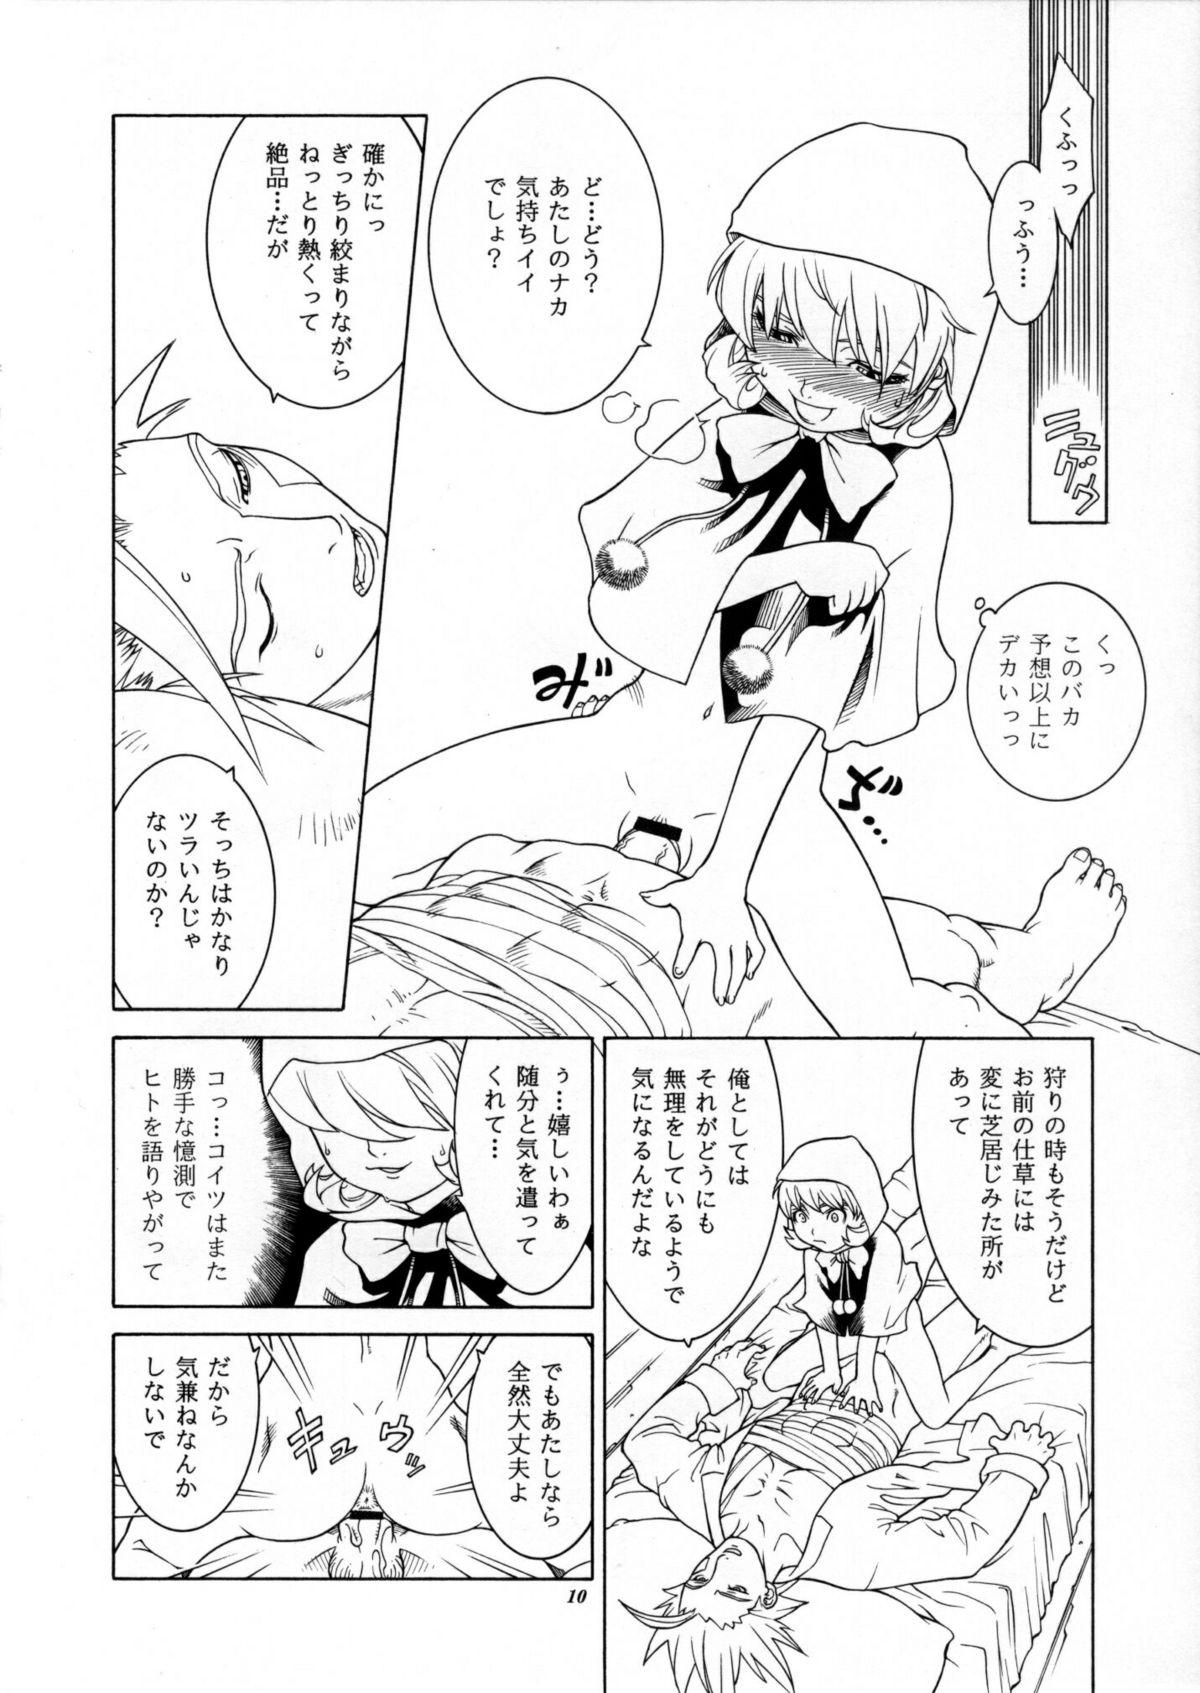 Perfect Body Kan - Darkstalkers Blow Job - Page 9